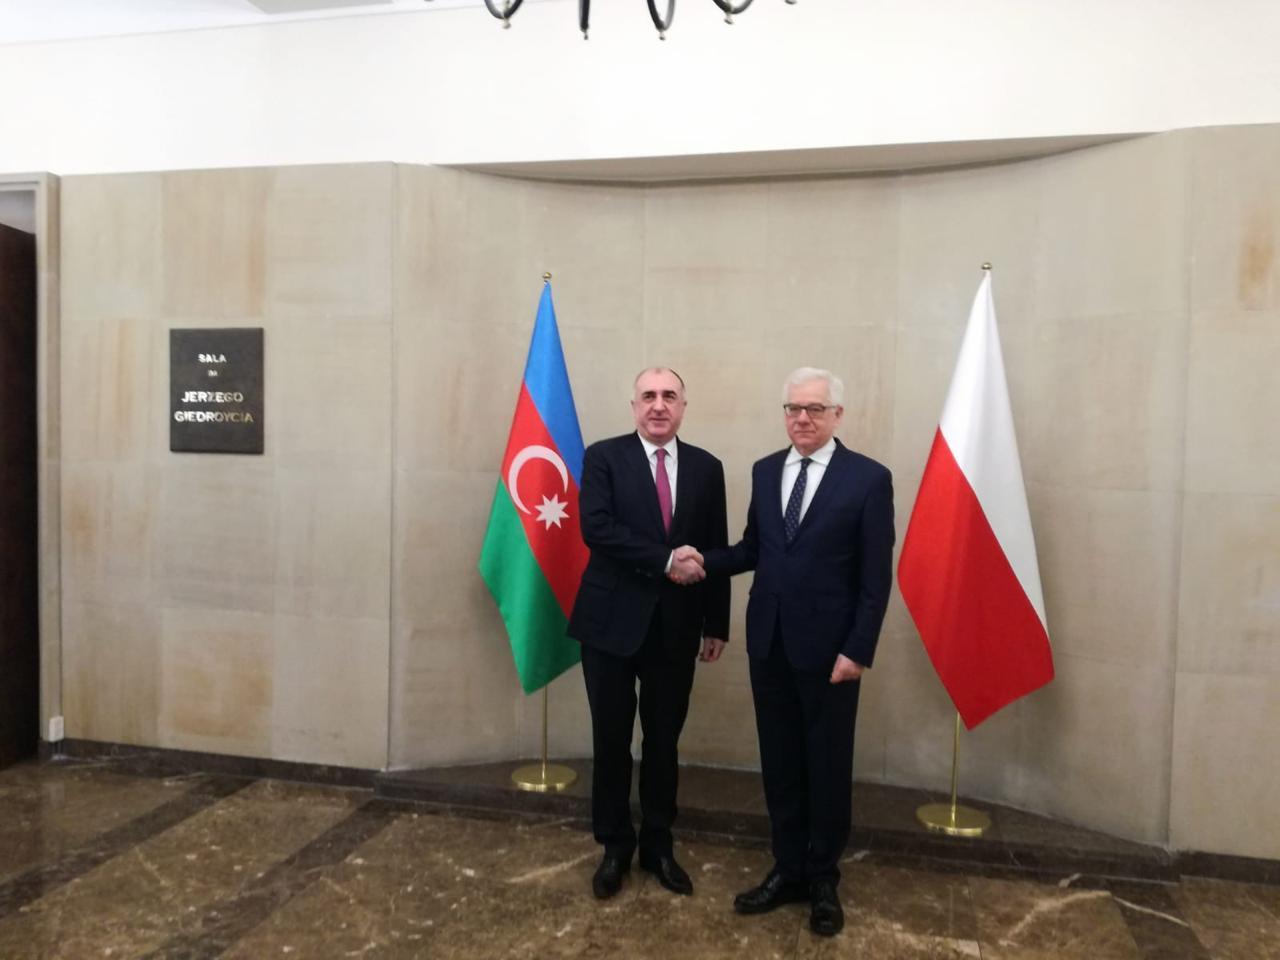 Poland interested in developing cooperation with Azerbaijan in energy sector